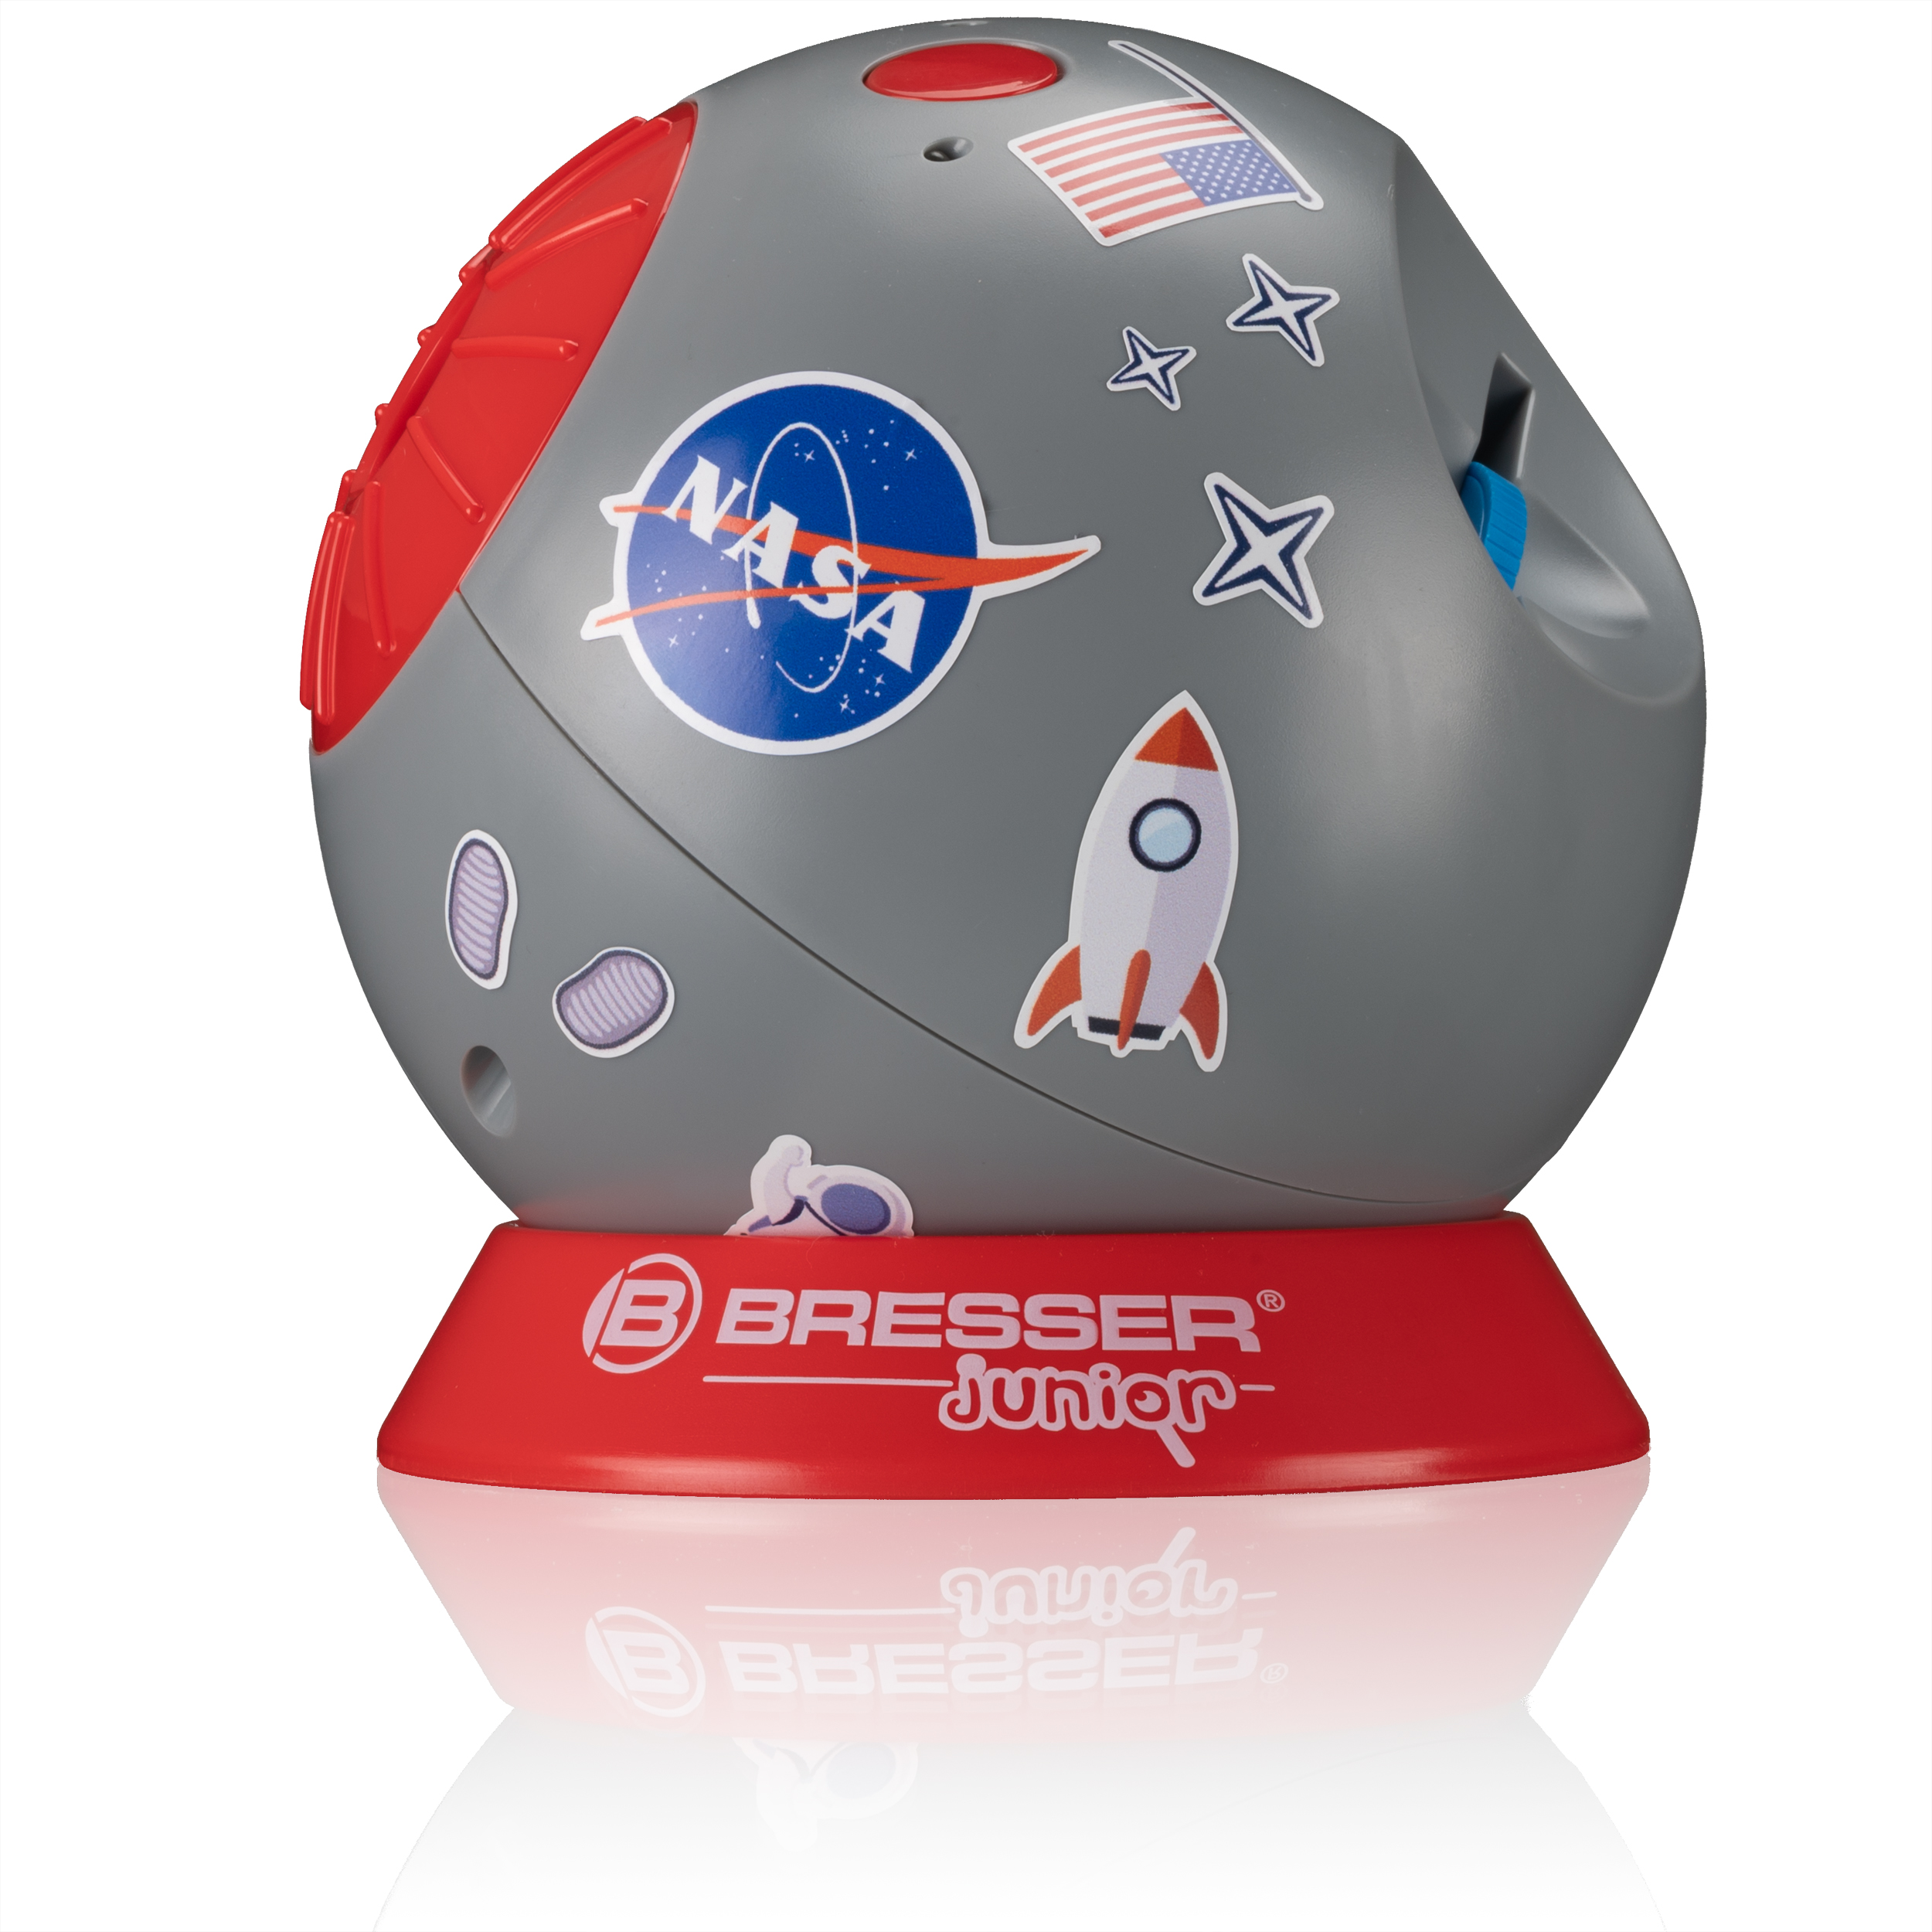 ISA Space Exploration NASA-themed Space Projector (Refurbished)